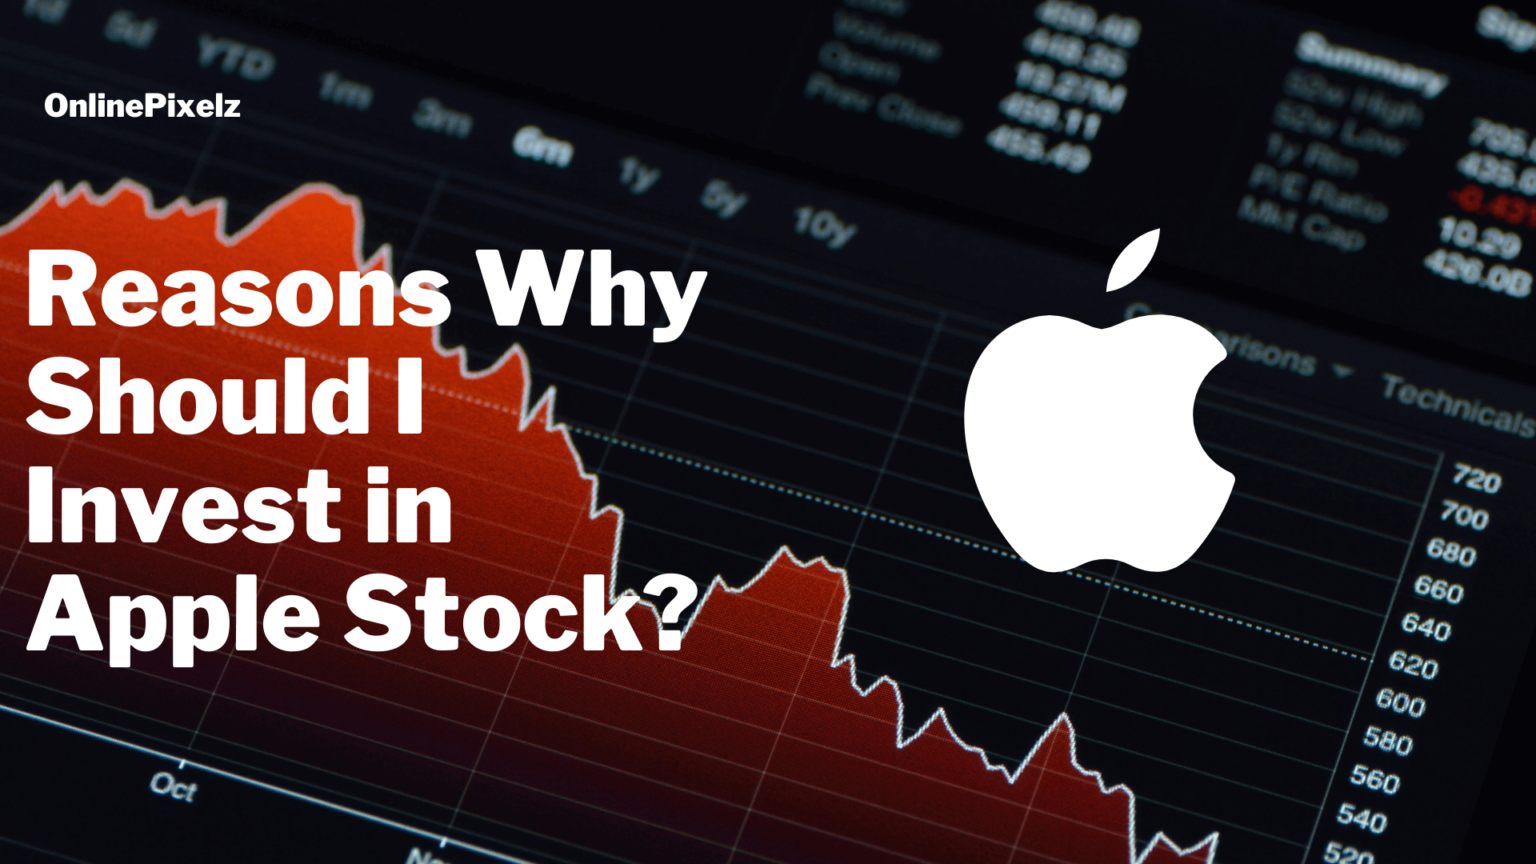 Why Should I Invest in Apple Stock